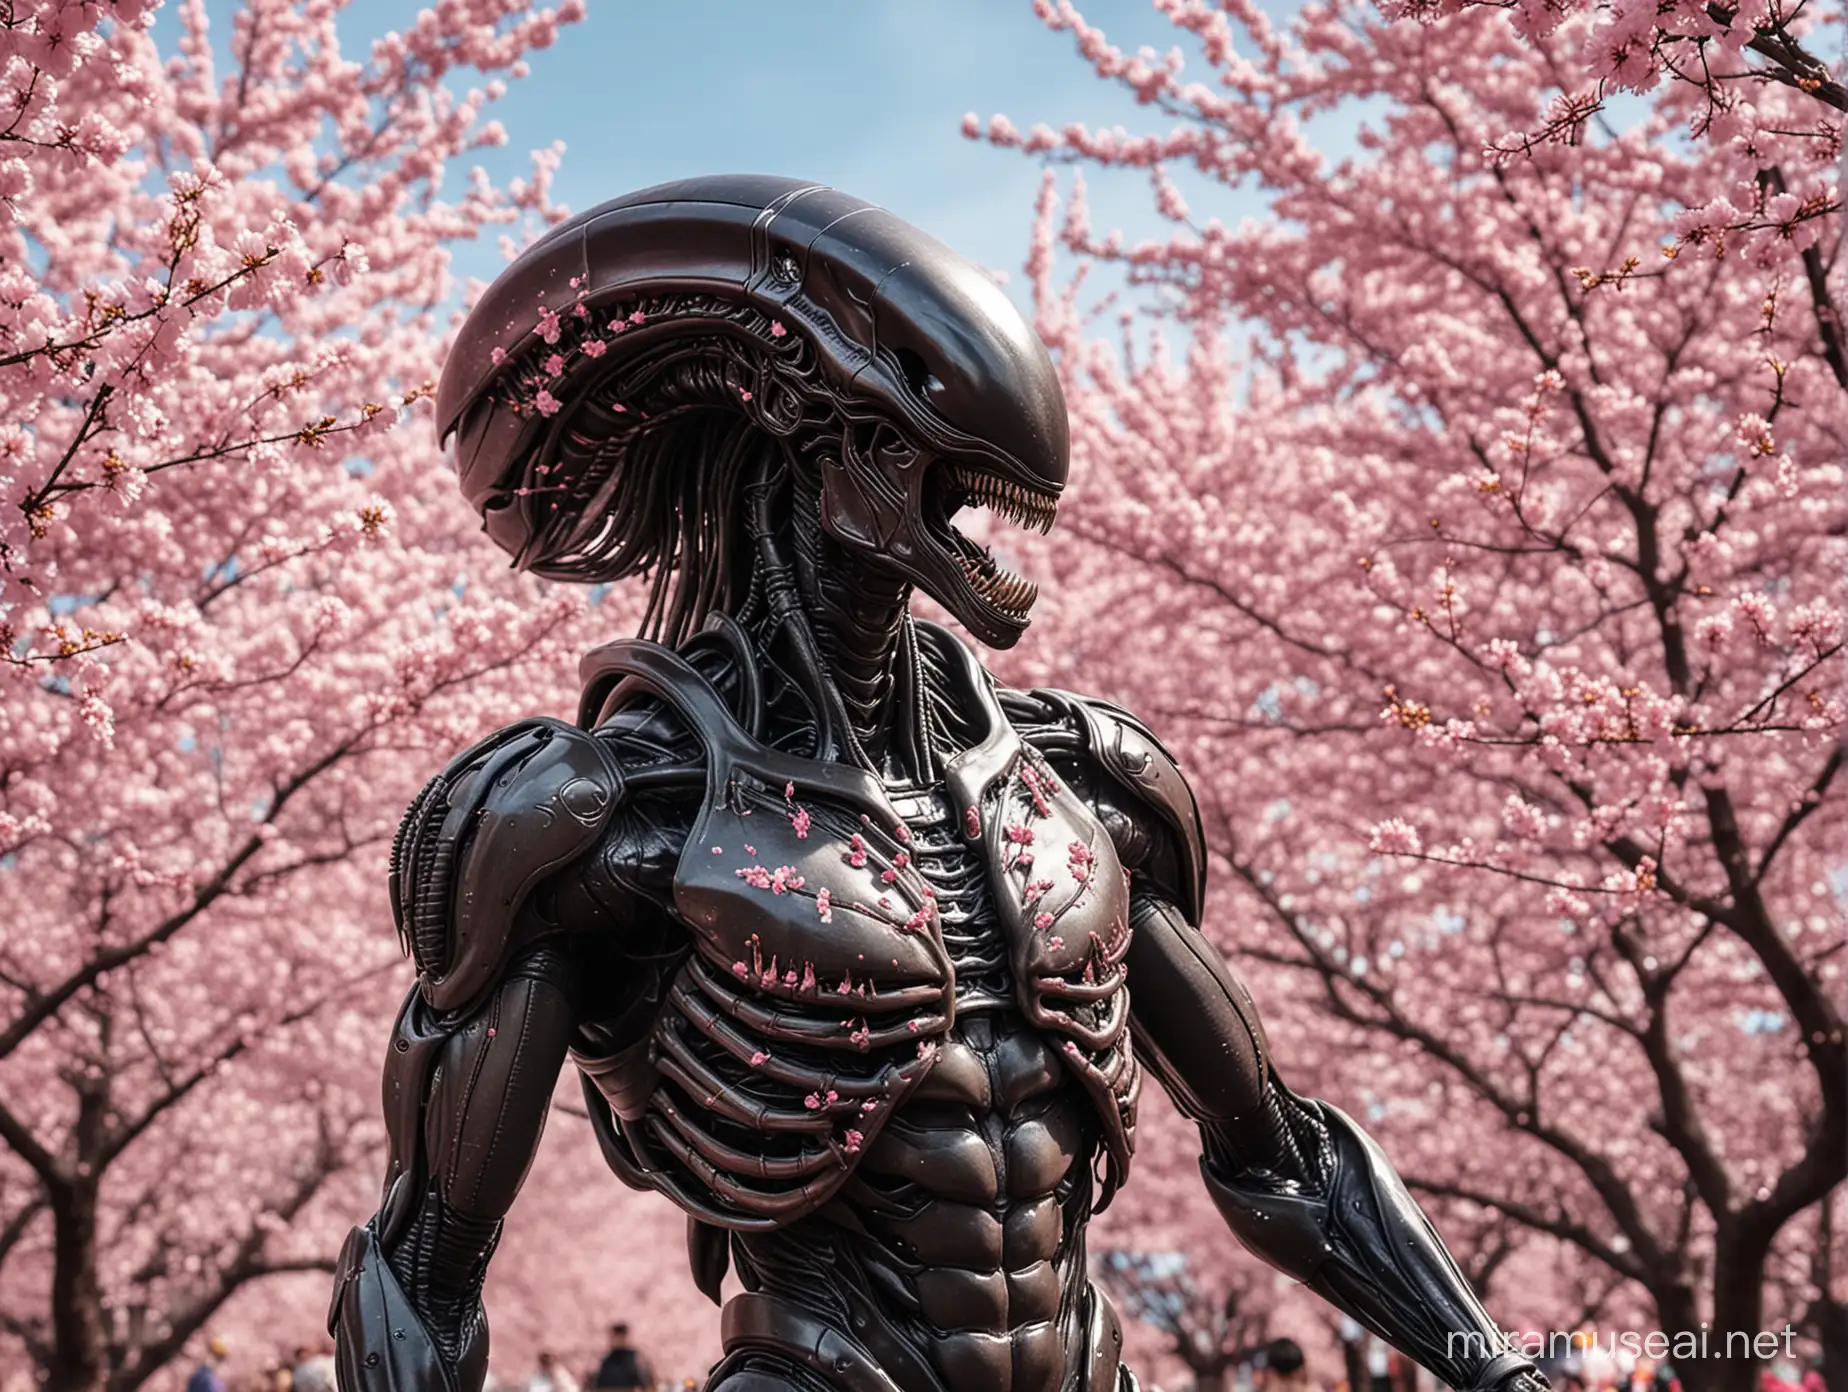 Xenomorph at Cherry Blossom Festival Extraterrestrial Embracing Earthly Beauty